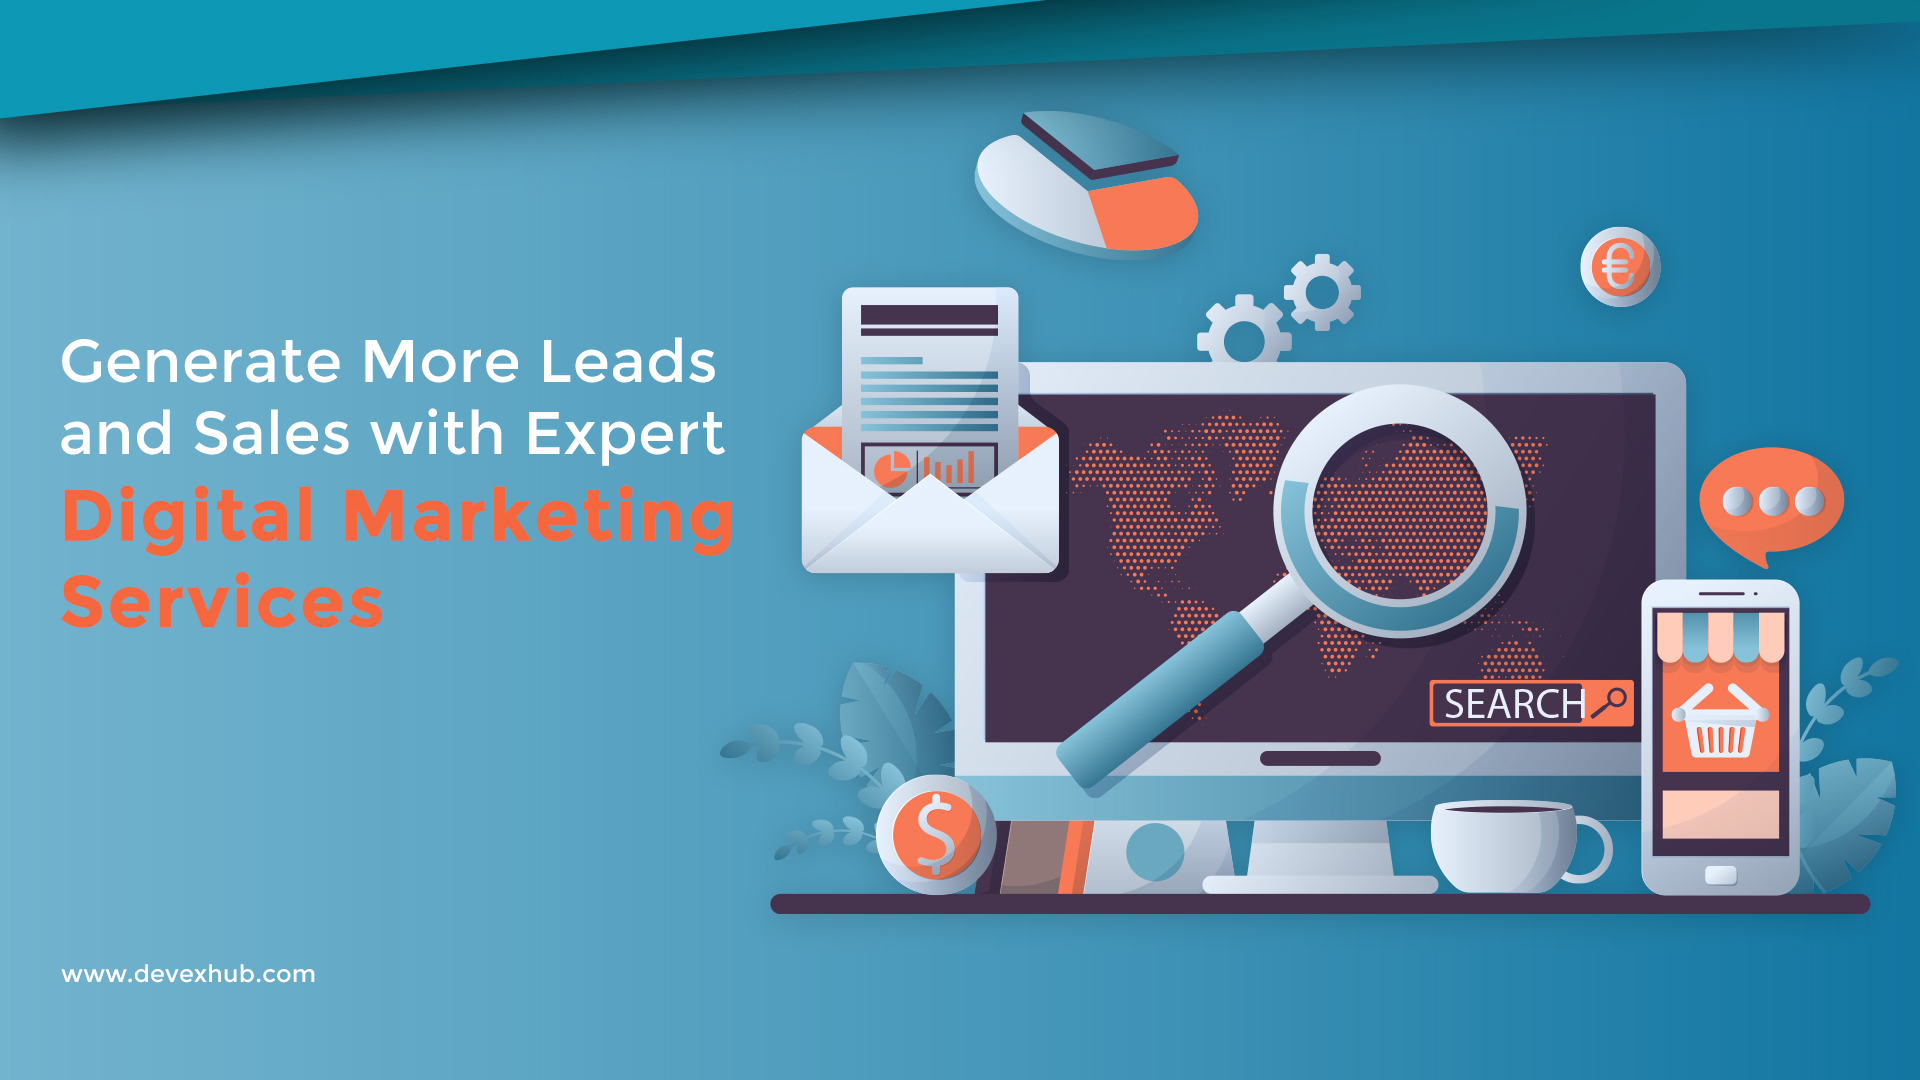 Generate More Leads and Sales with Expert Digital Marketing Services